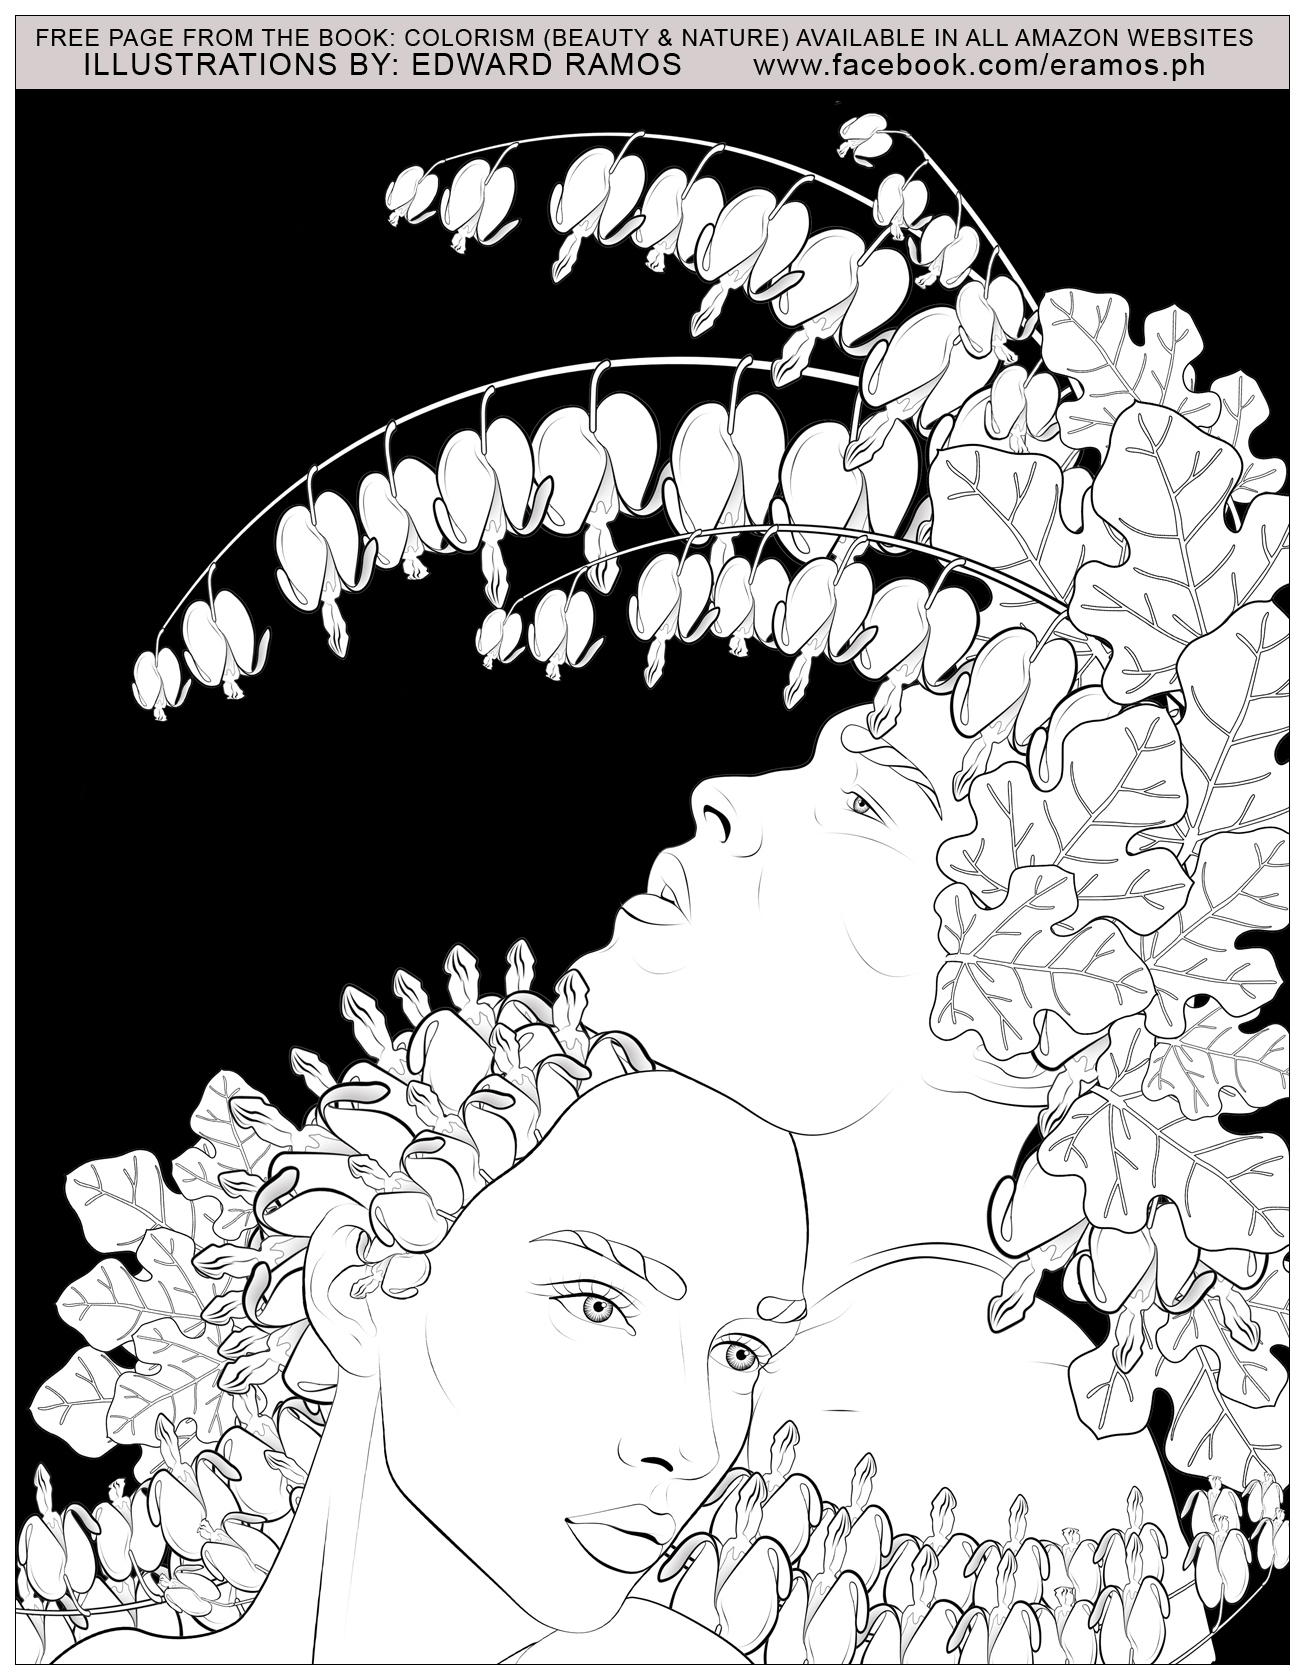 Illustration from the book Colorism - Beauty & Nature by Edward Ramos - 14, Artist : Edward Ramos